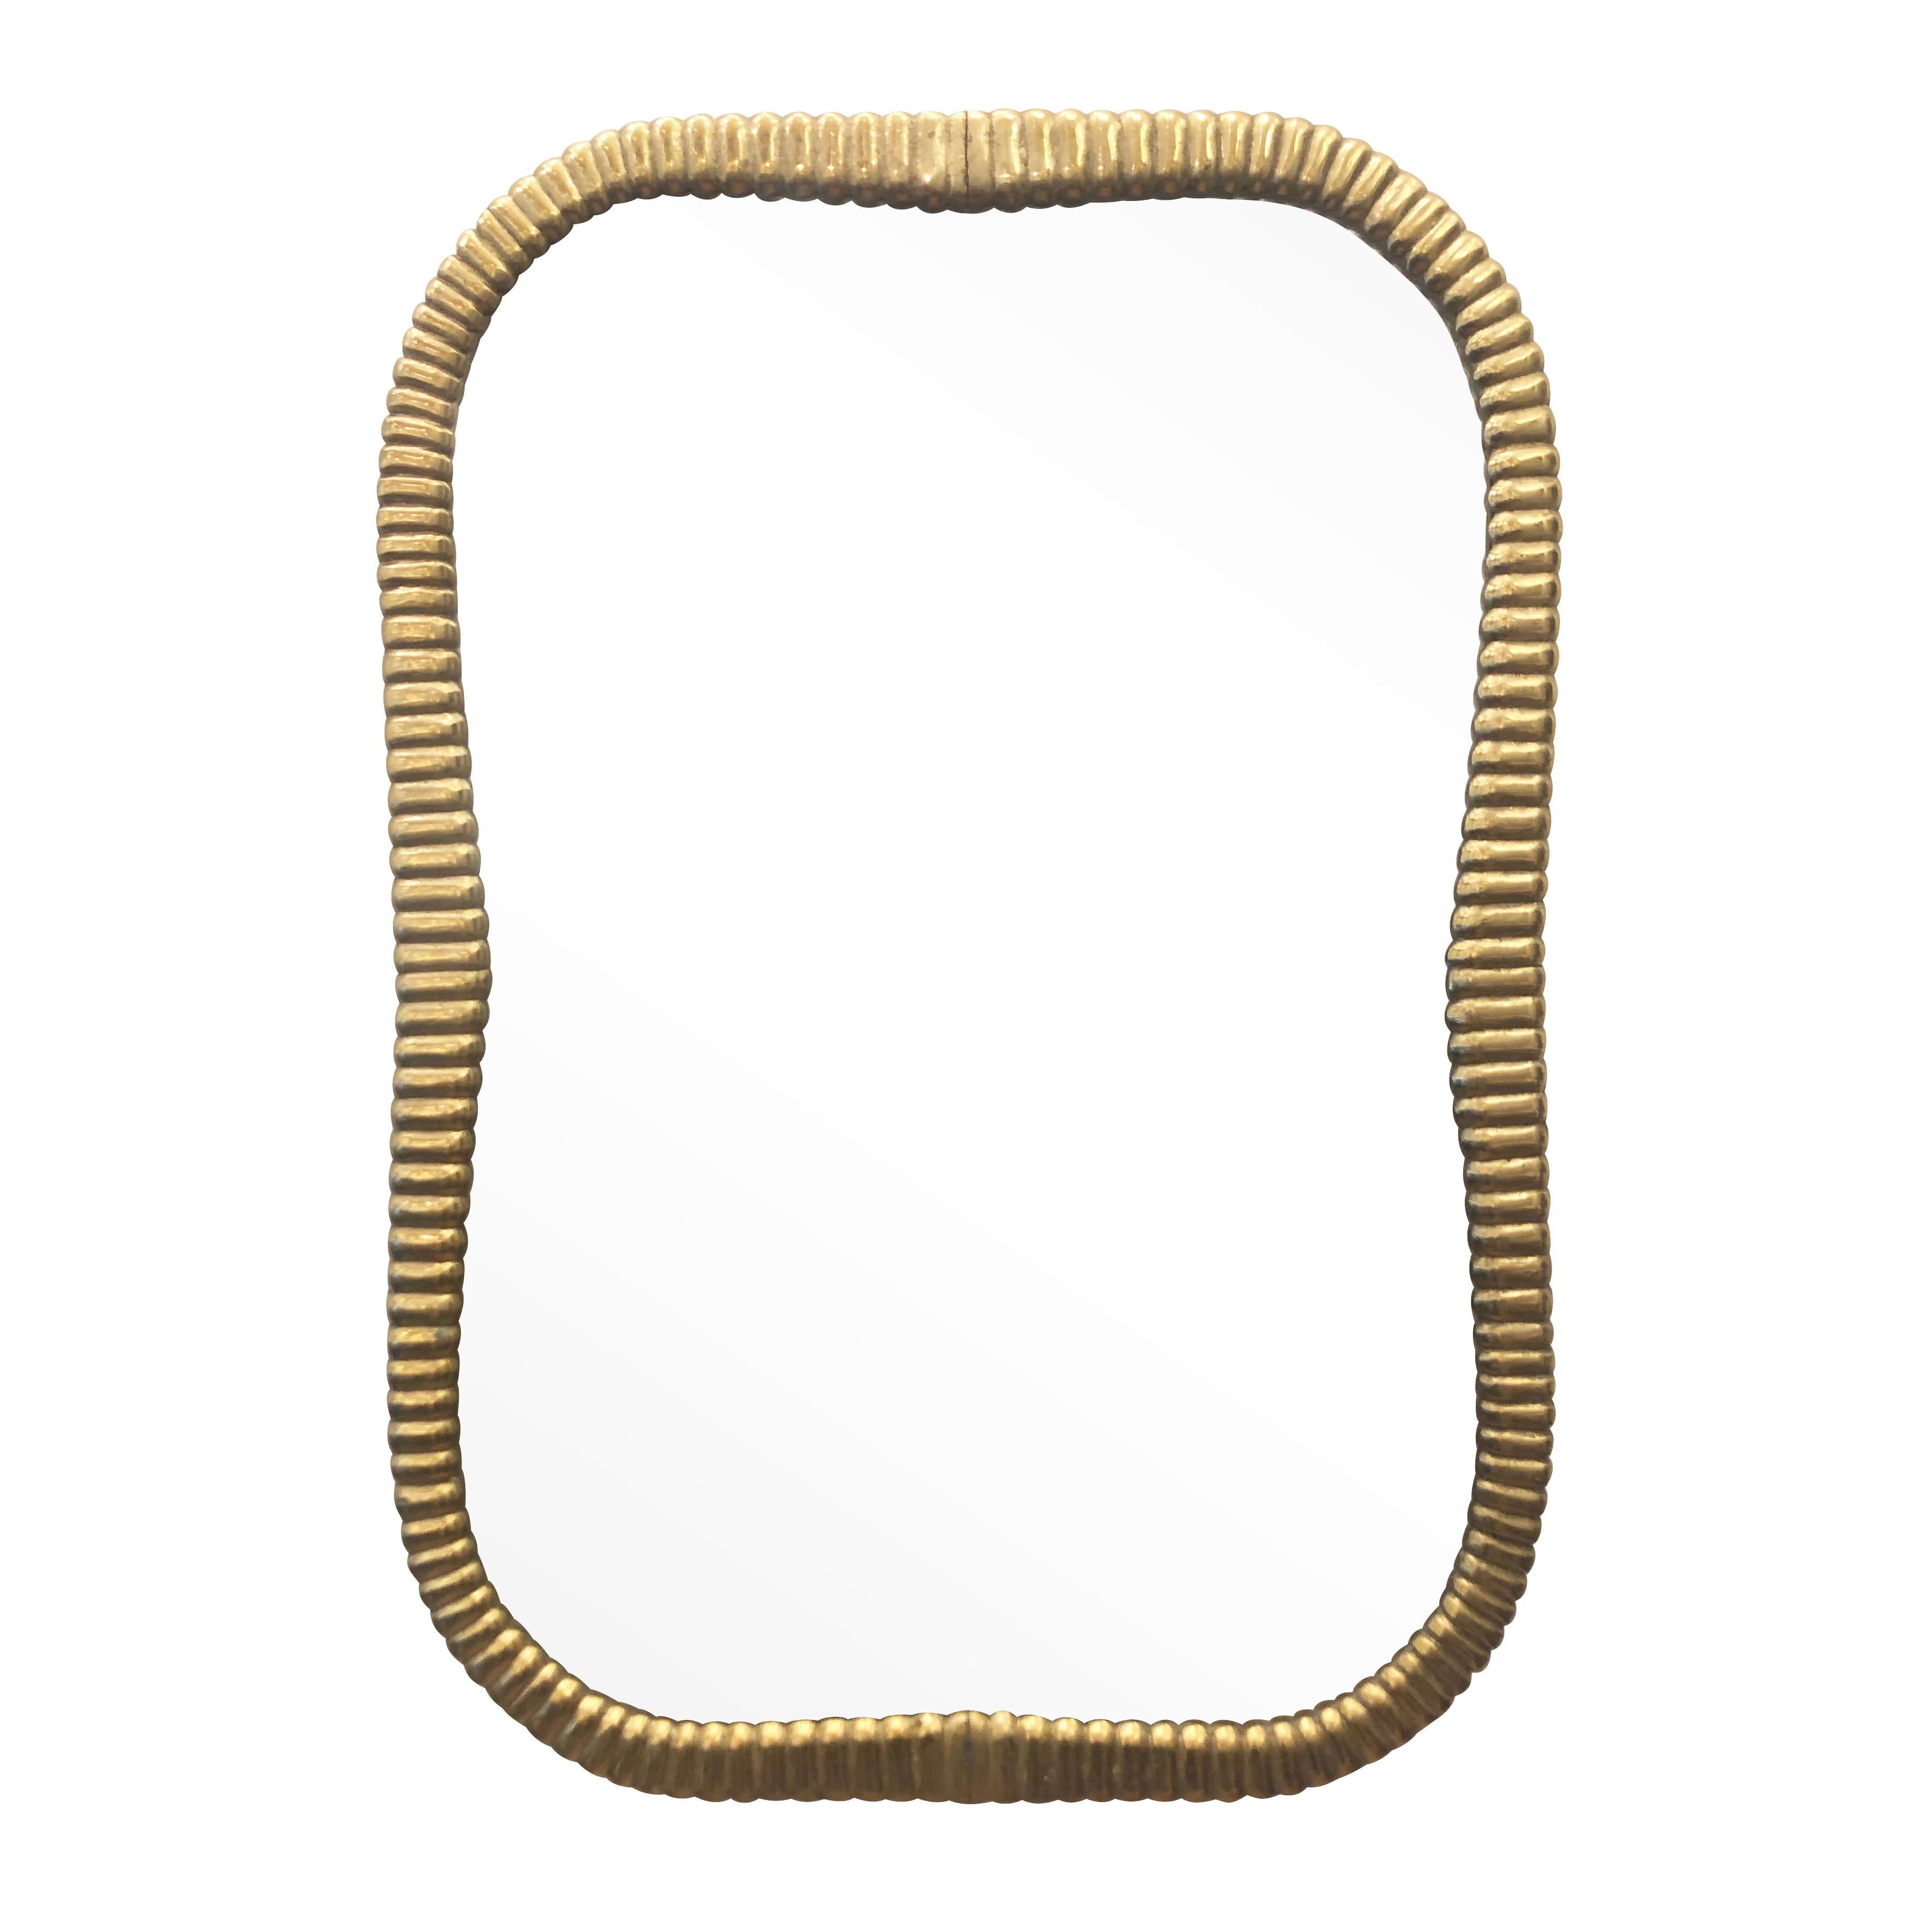 Italian midcentury mirror with a cast bronze frame

Condition: Excellent vintage condition, minor wear consistent with age and use

Measures: Width 21”

Depth 1”

Height 30.5”.

  